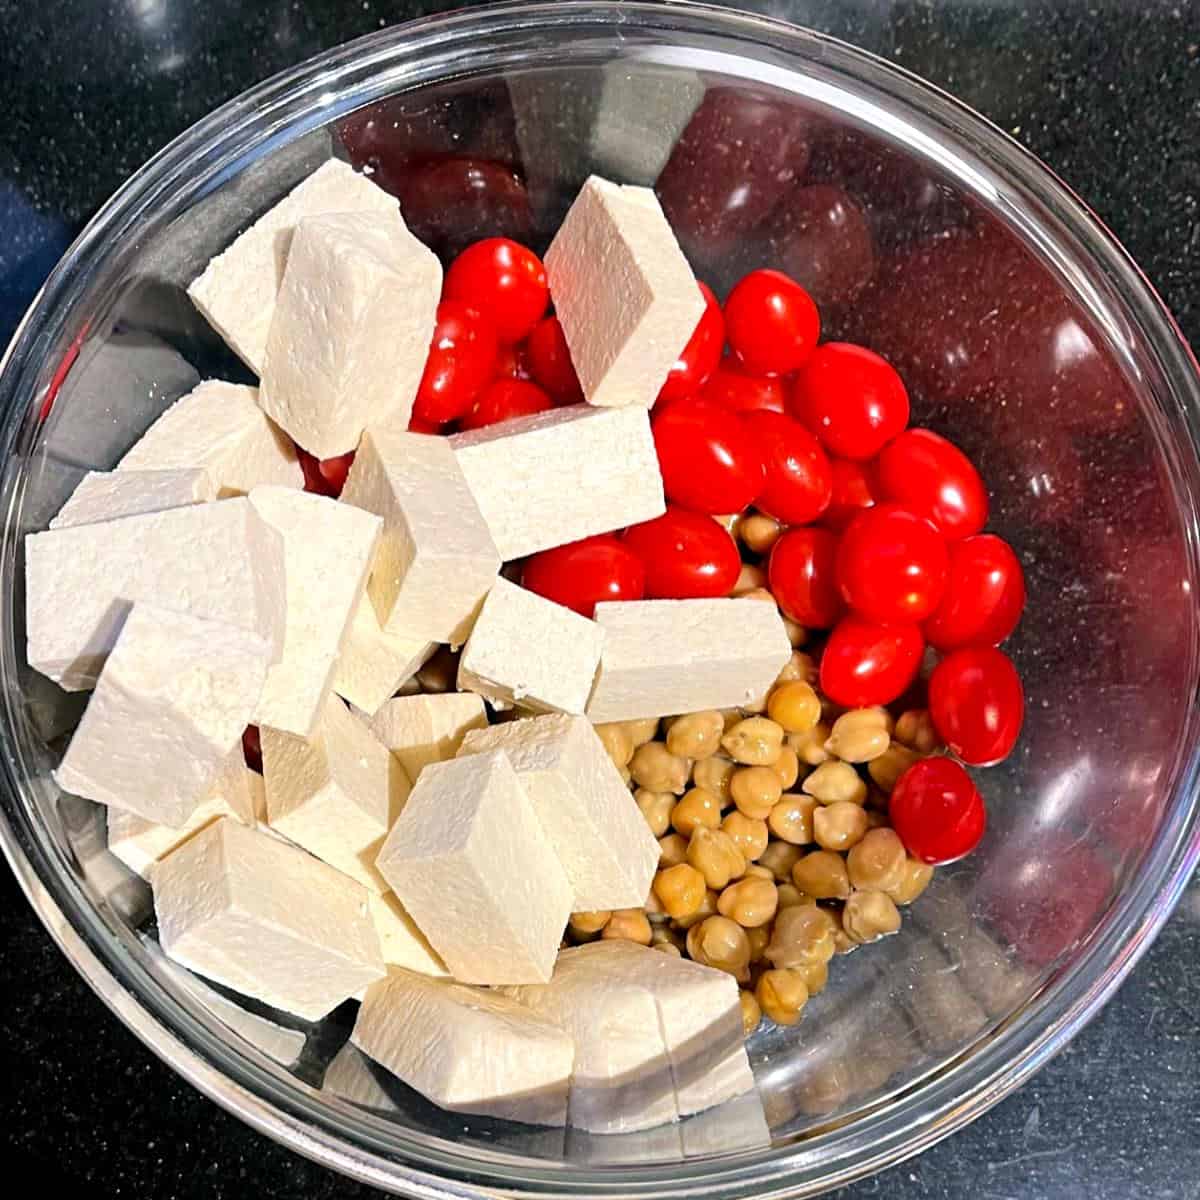 Chickpeas,c cherry tomatoes and tofu in bowl.